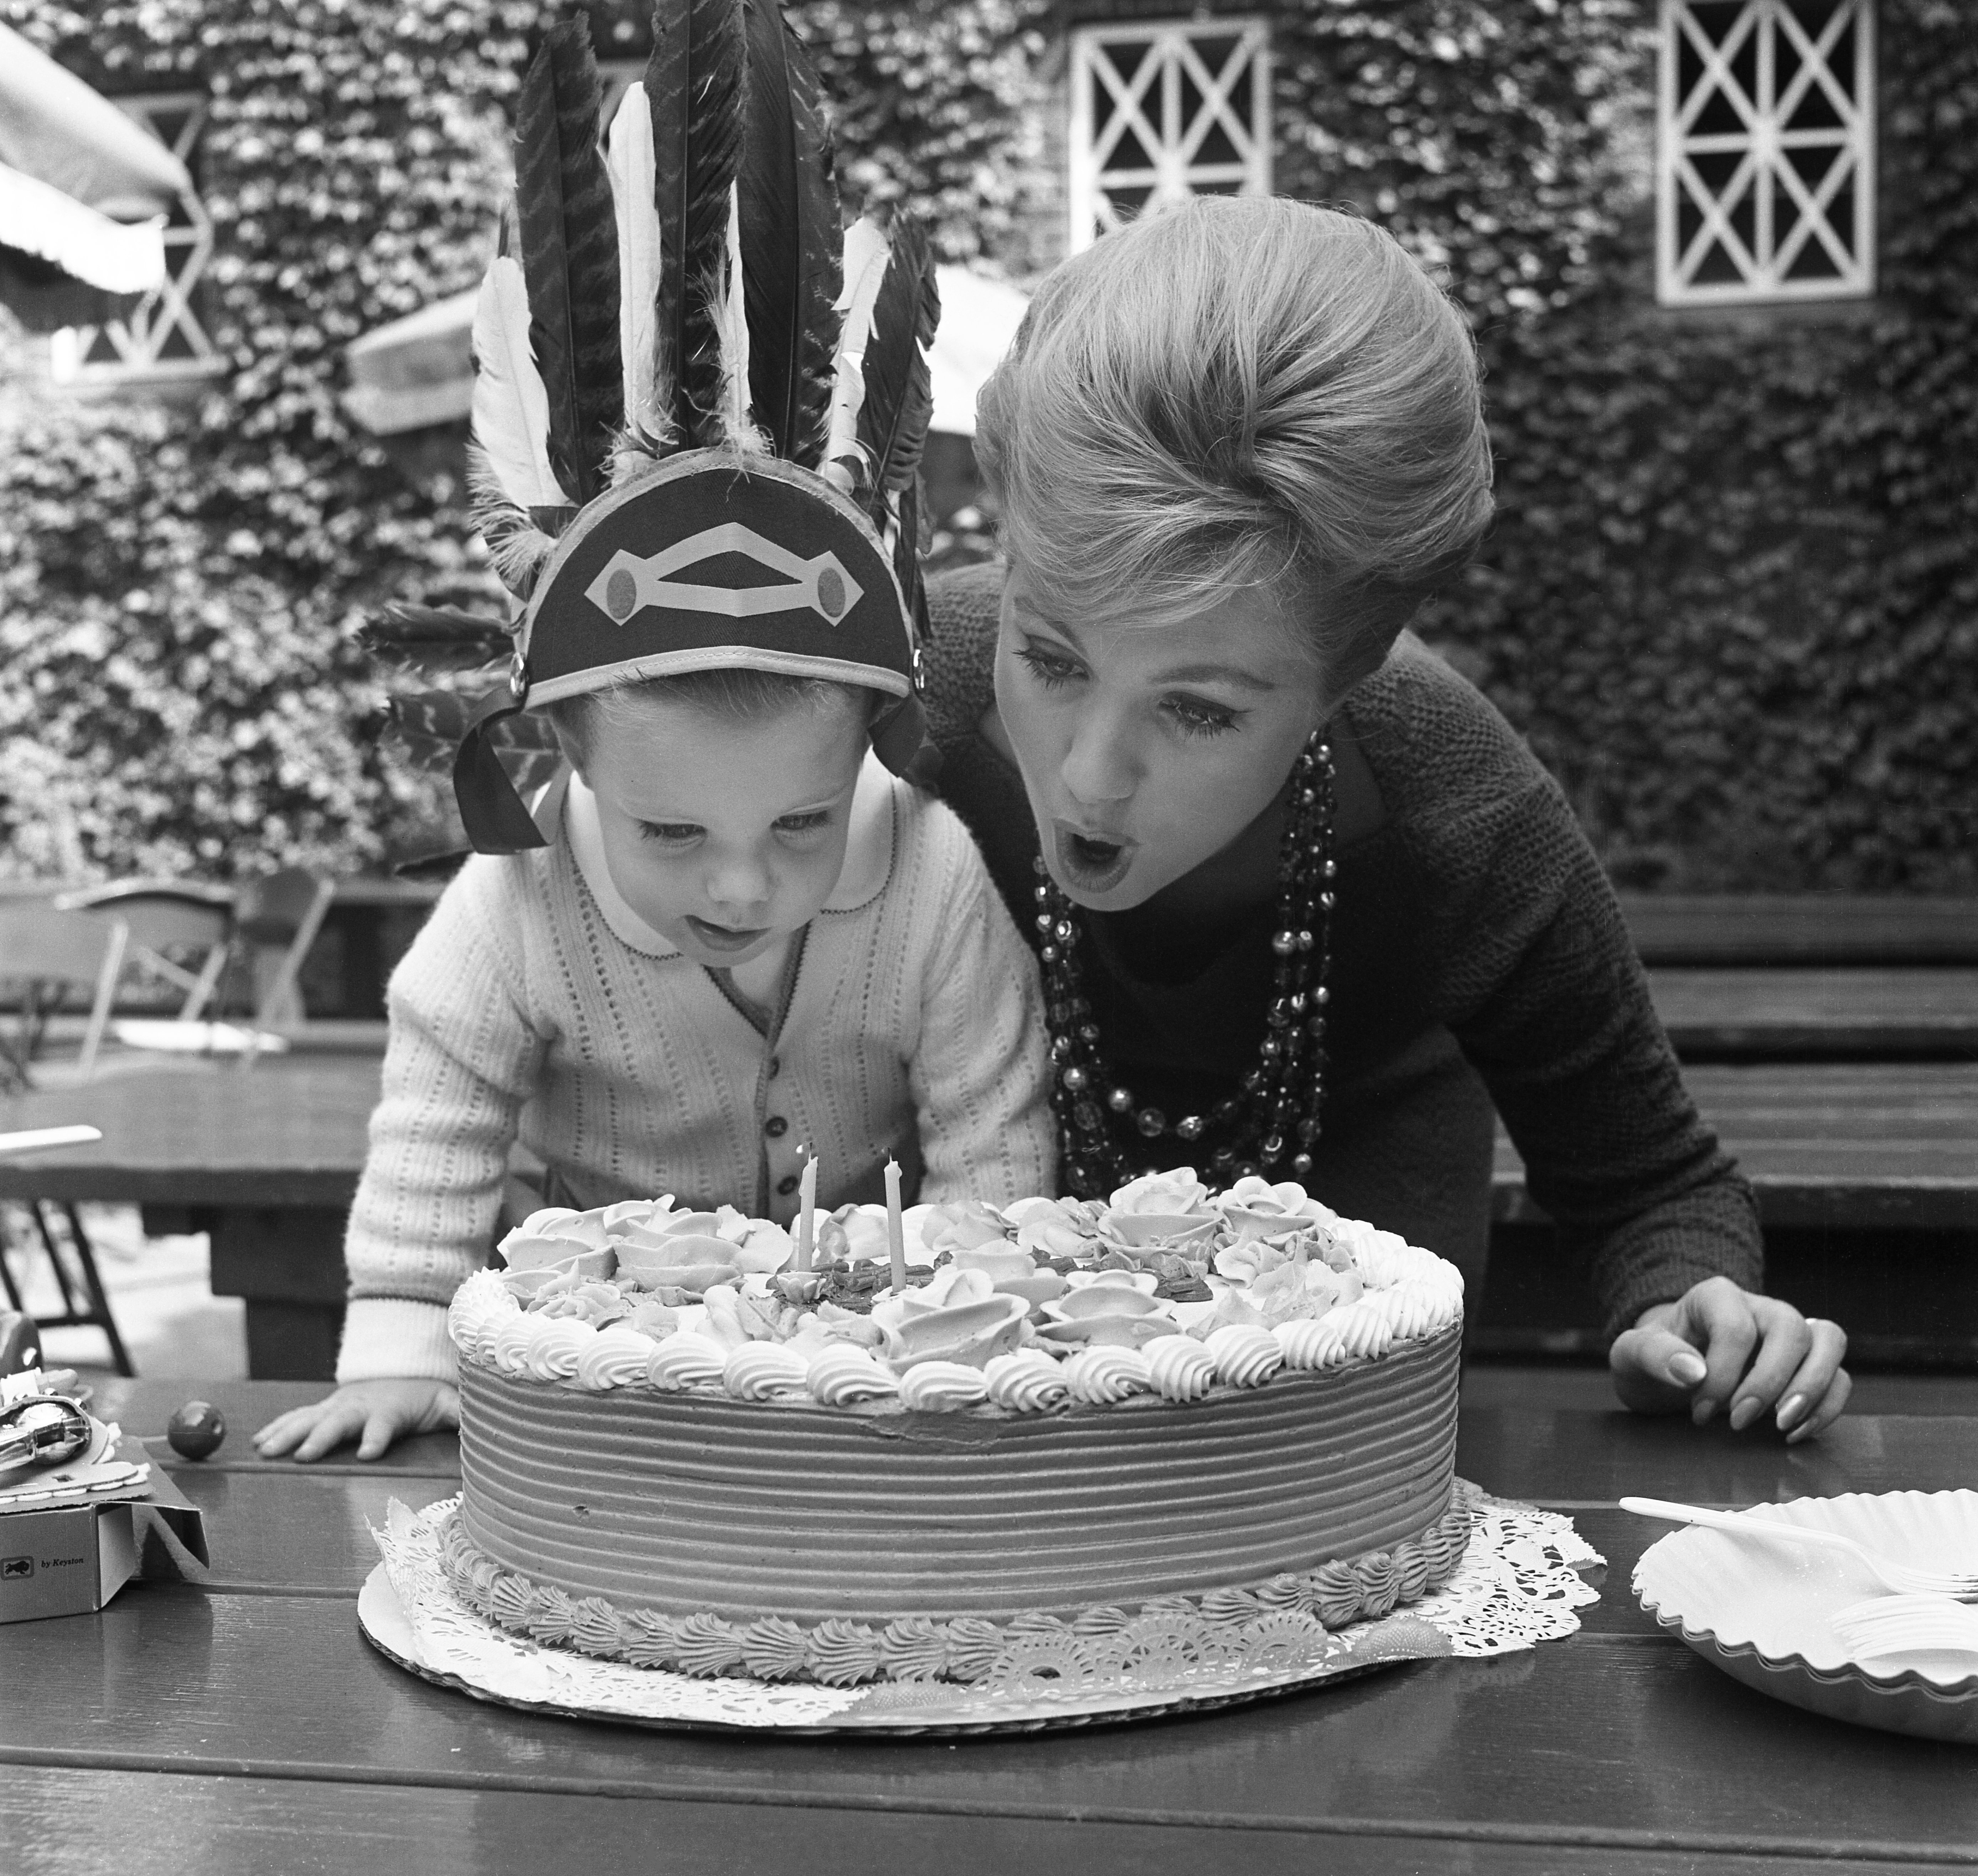 Shaun Cassidy celebrating his second birthday with his mother Shirley Jones, in New York on October 15, 1960. | Source: Bettmann Archive/Getty Images